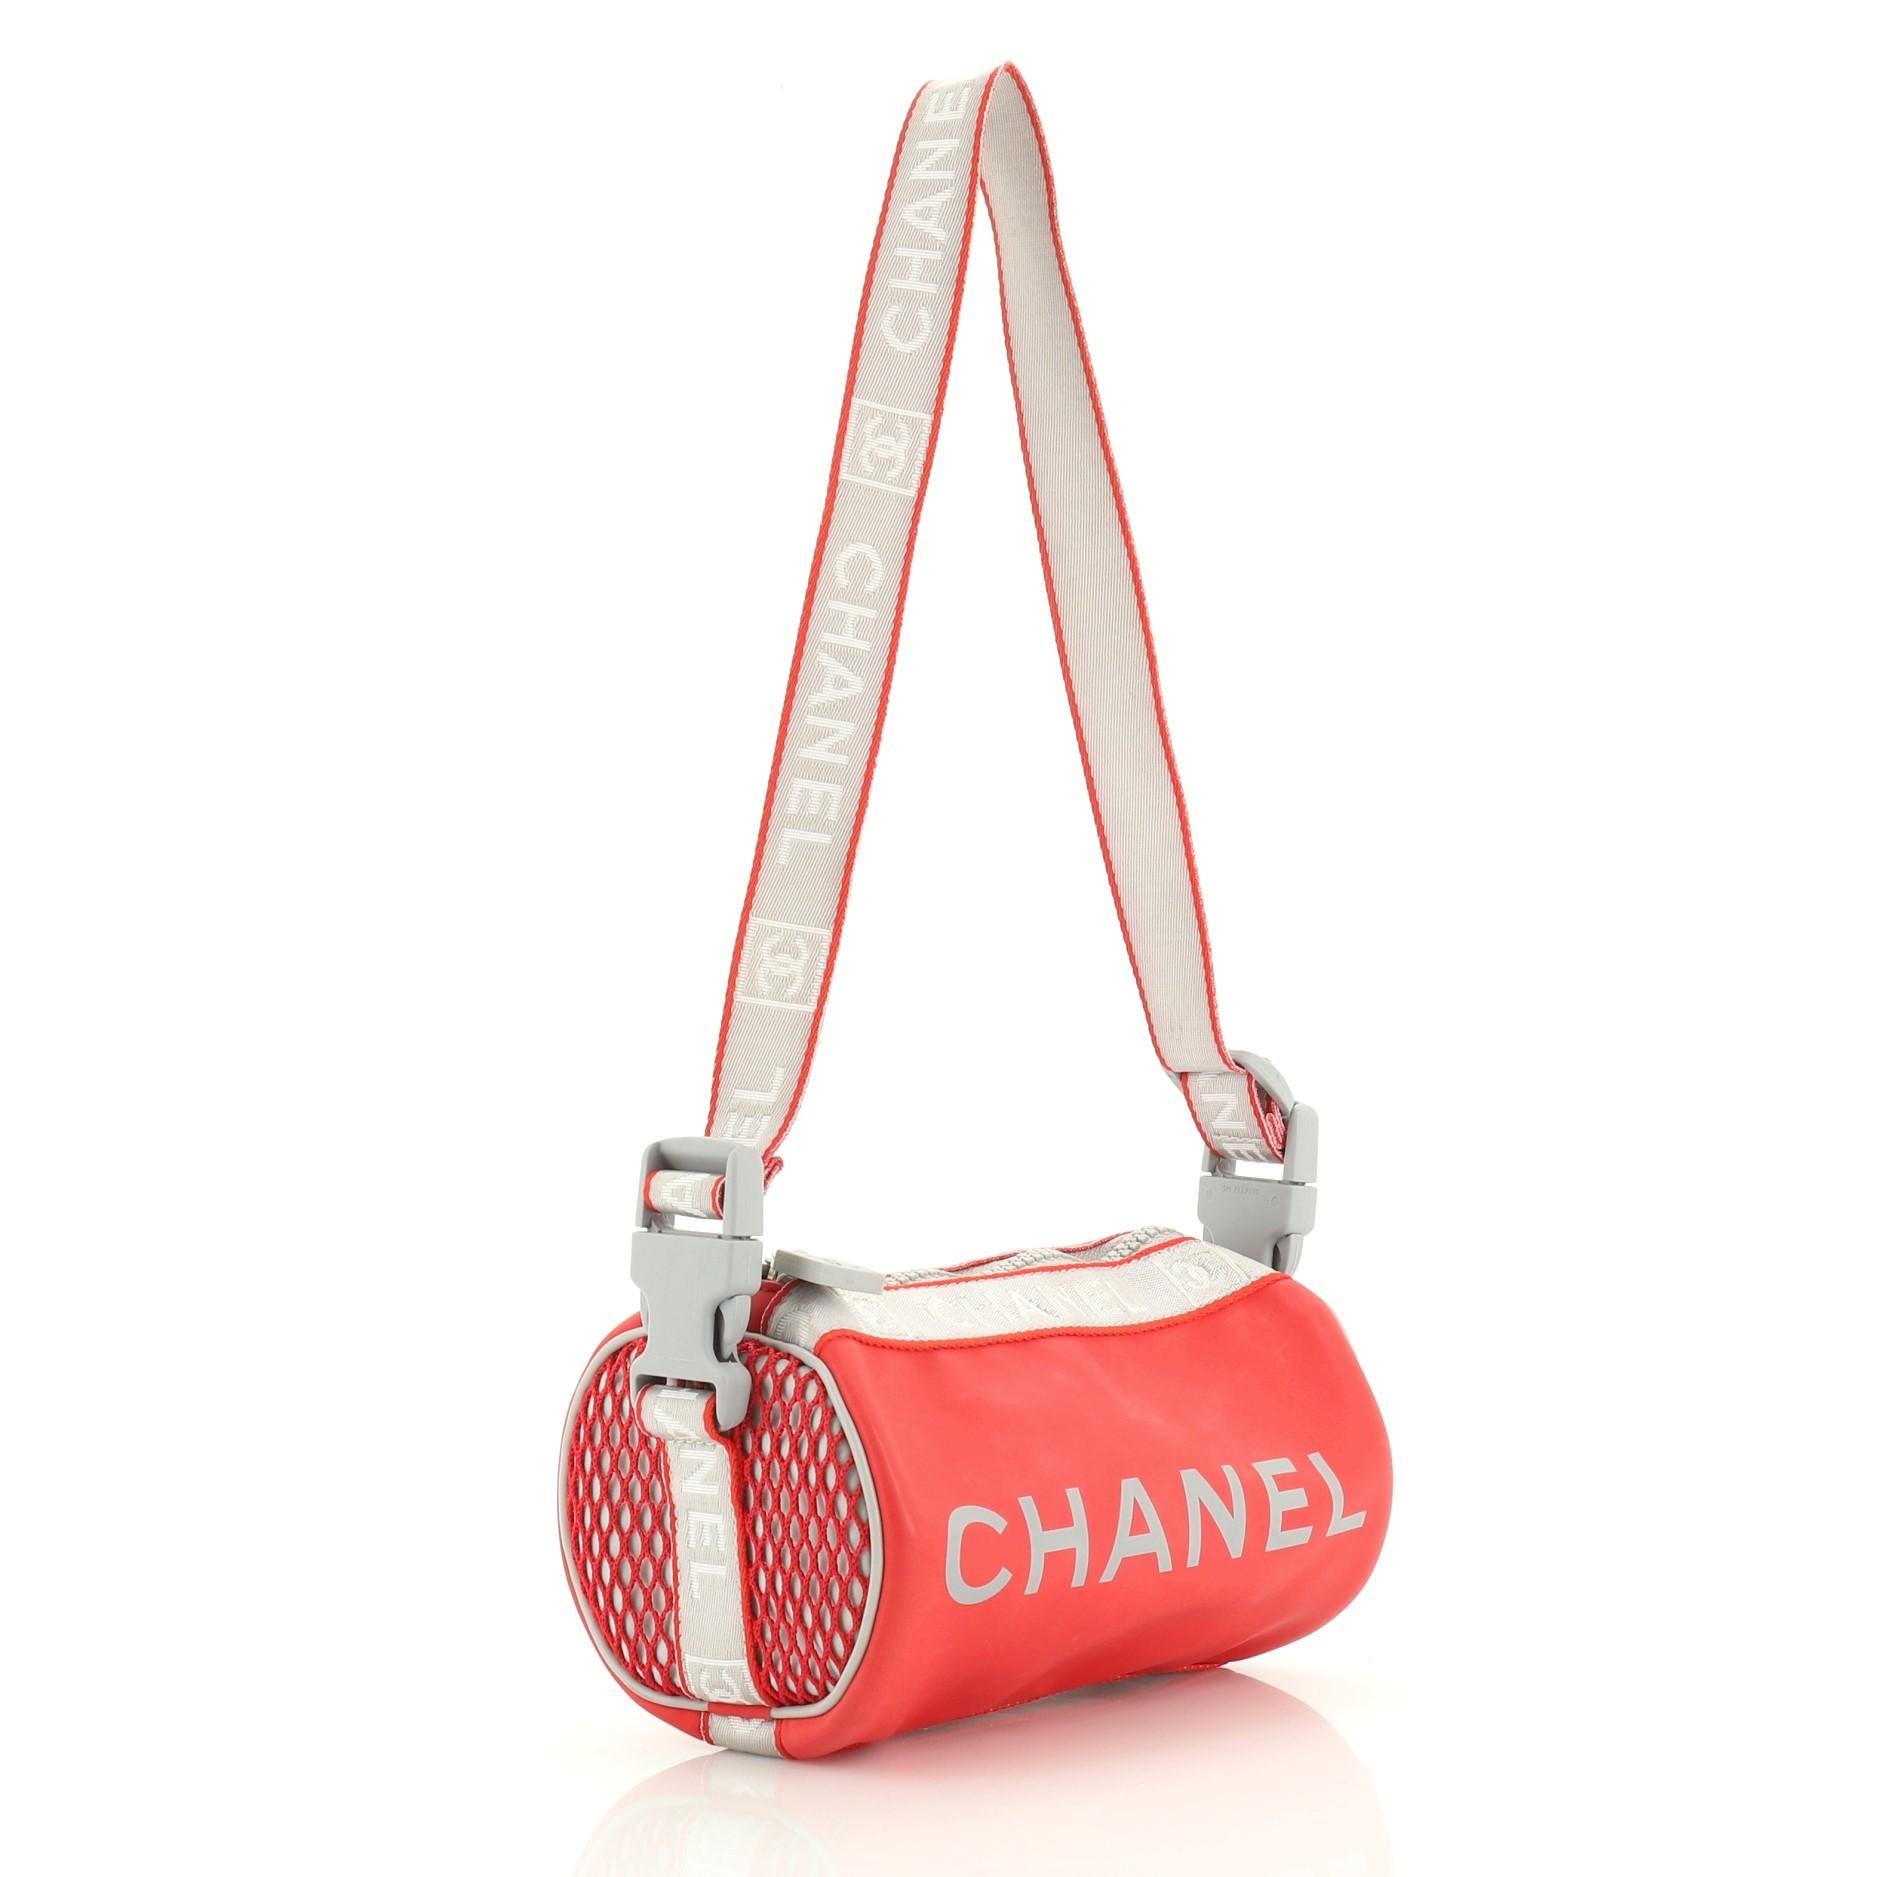 This Chanel Sports Line Roll Shoulder Bag Coated Canvas Small, crafted from gray and red coated canvas, features front printed CC logo and silver tone hardware. Its zip closure opens to a gray fabric interior. Authenticity code reads: